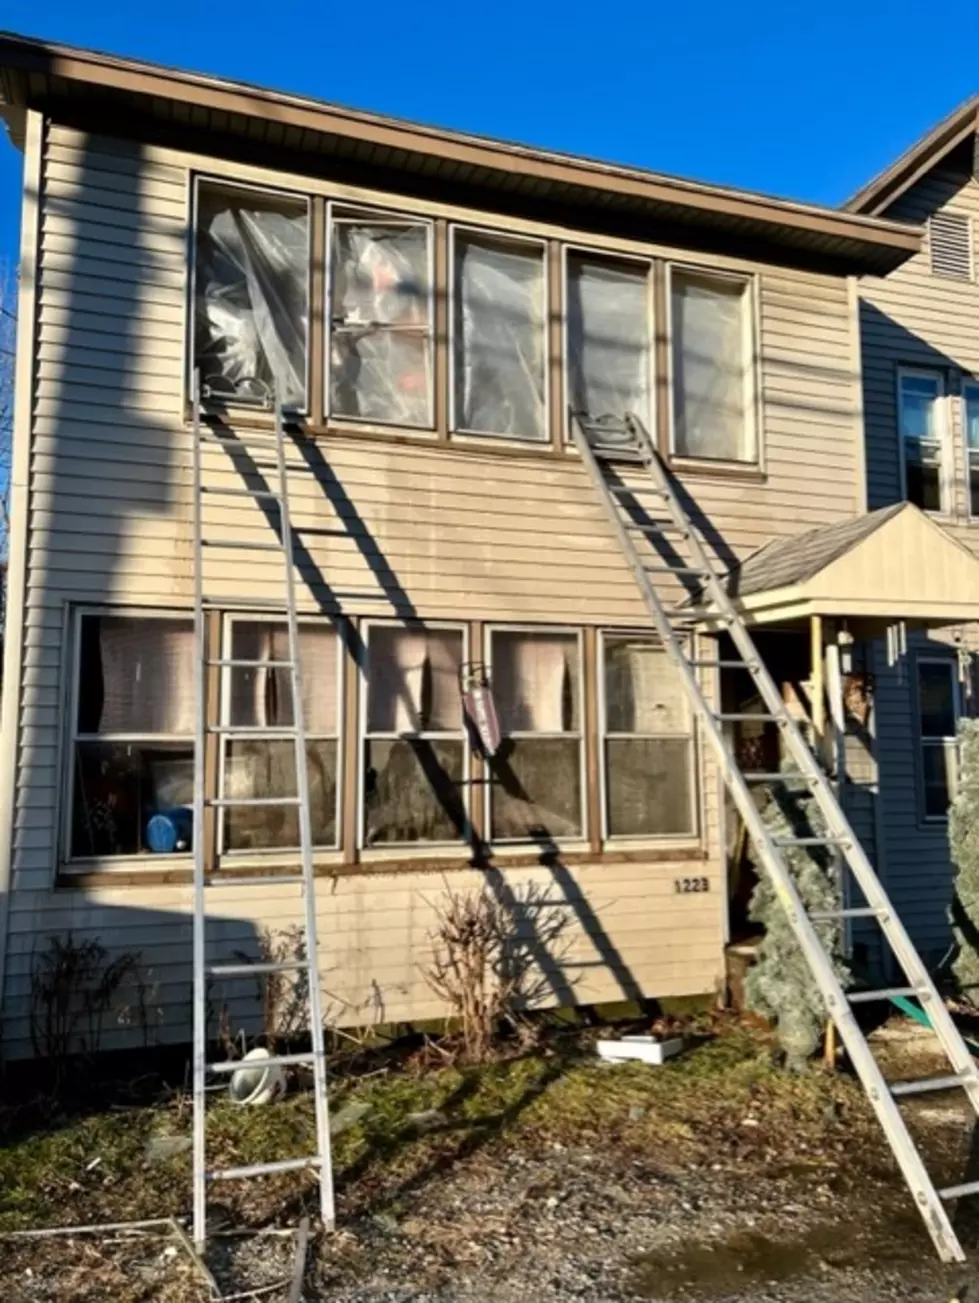 Pittsfield Structure&#8217;s Residents Alerted To Sunday Fire By Good Samaritan